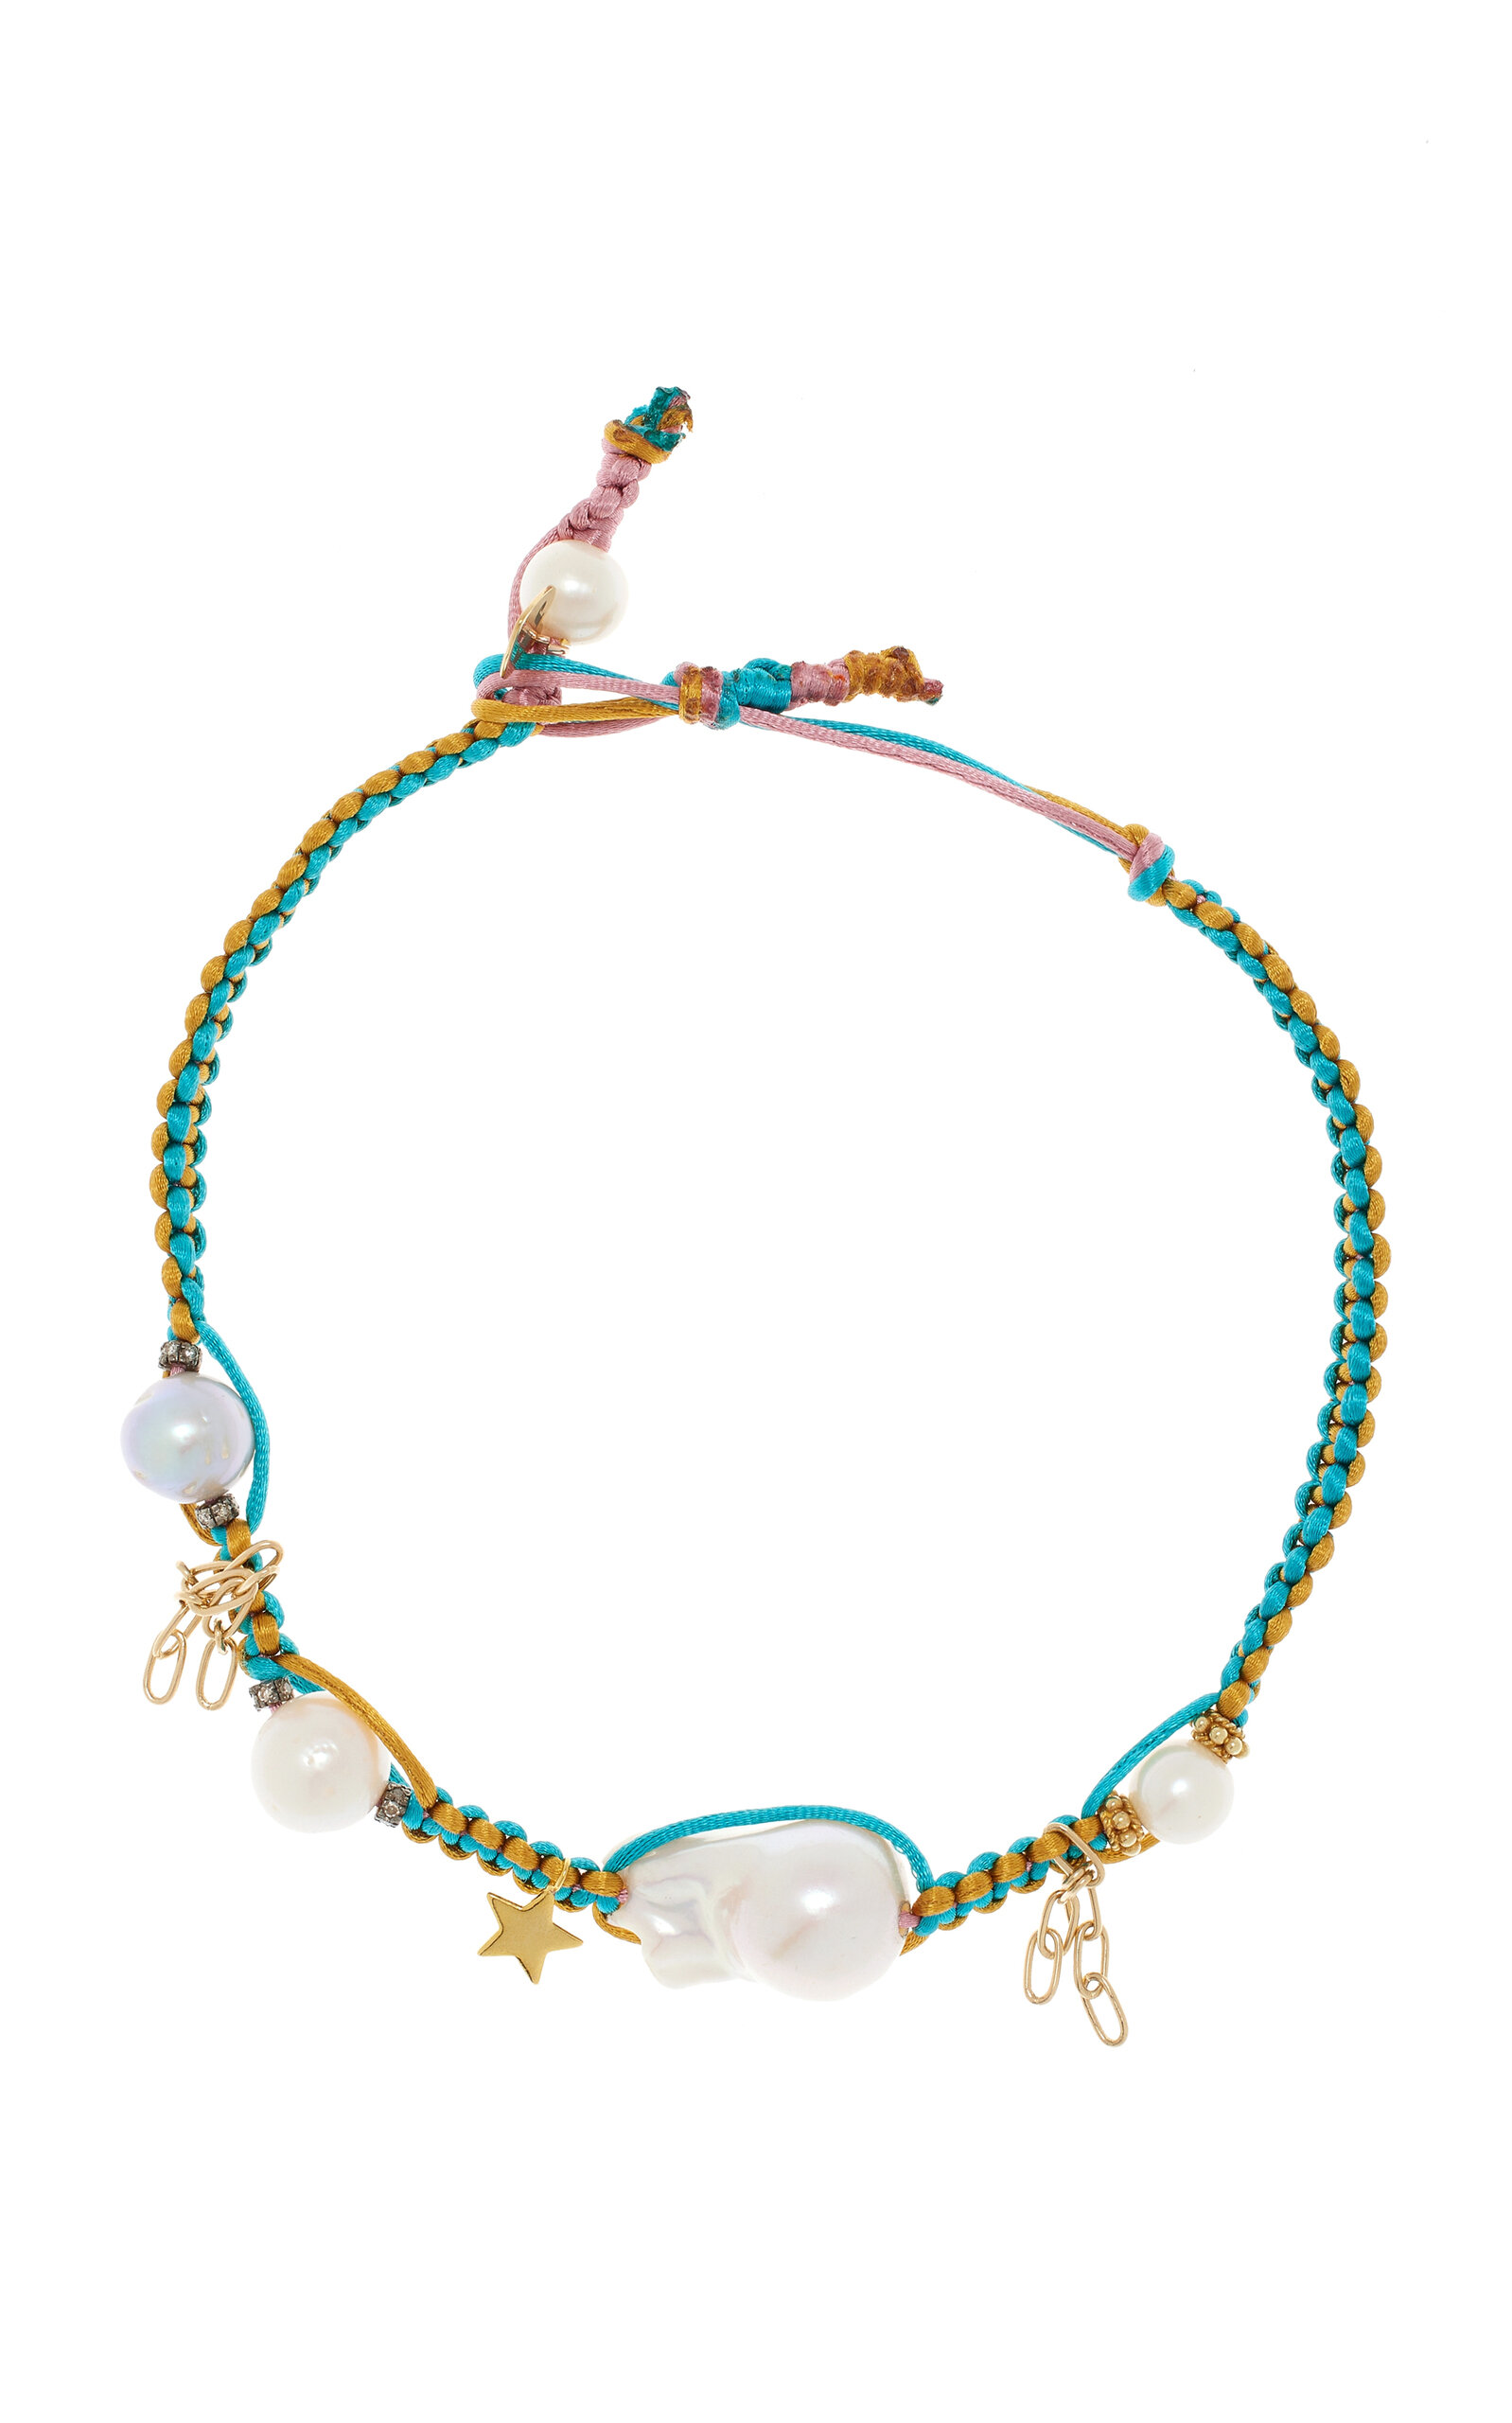 Mexican Dream Knotted Silk Necklace